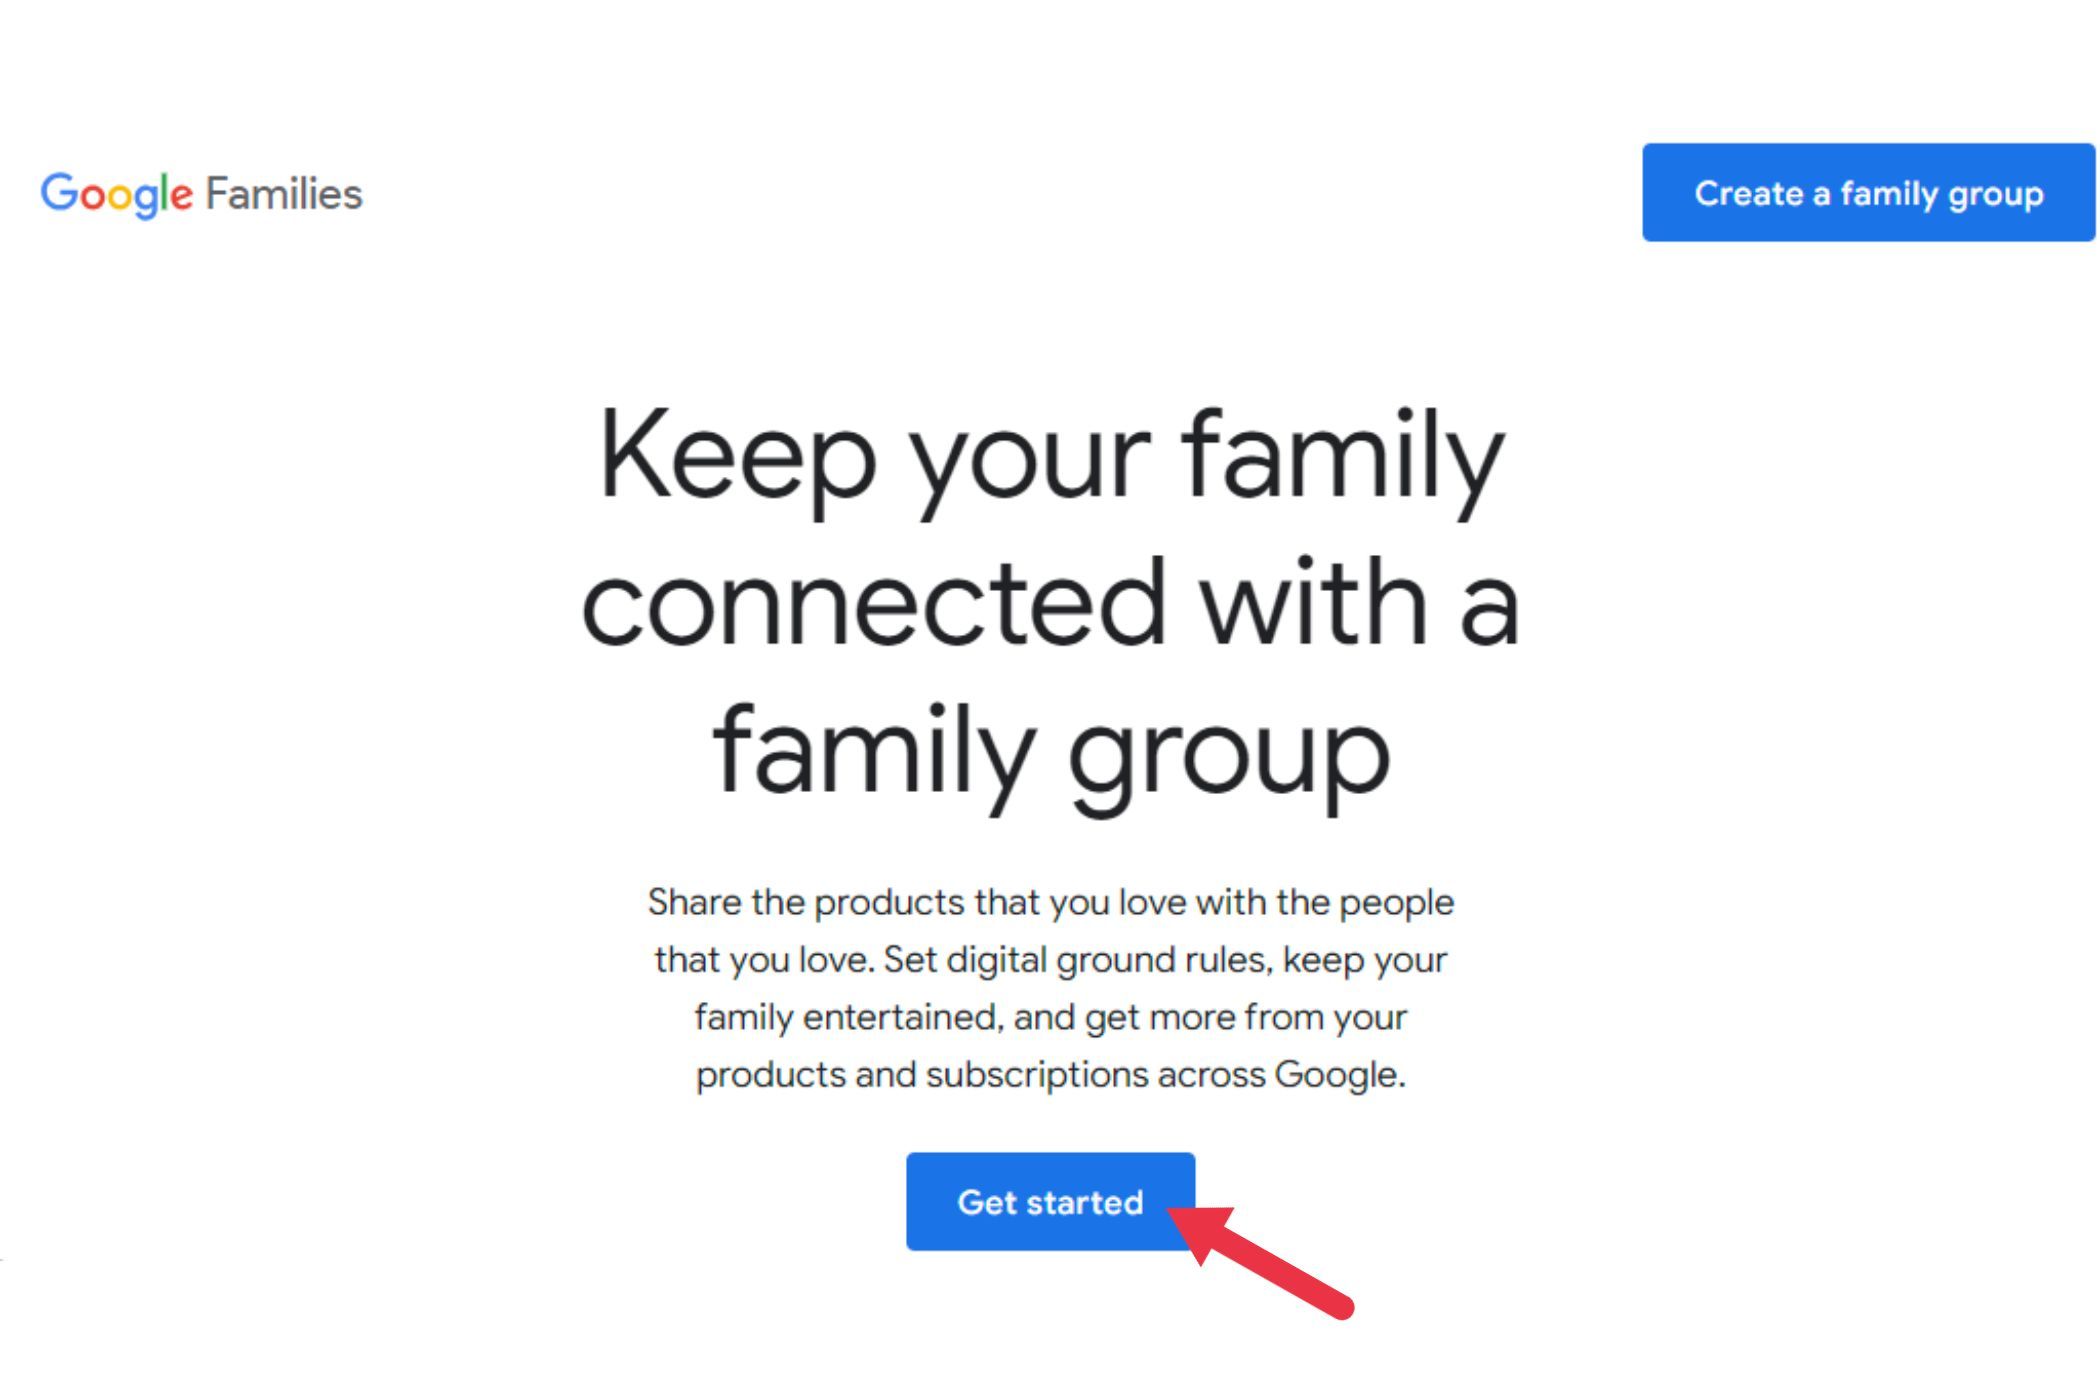 Go to the Google Families page and click Get Started.